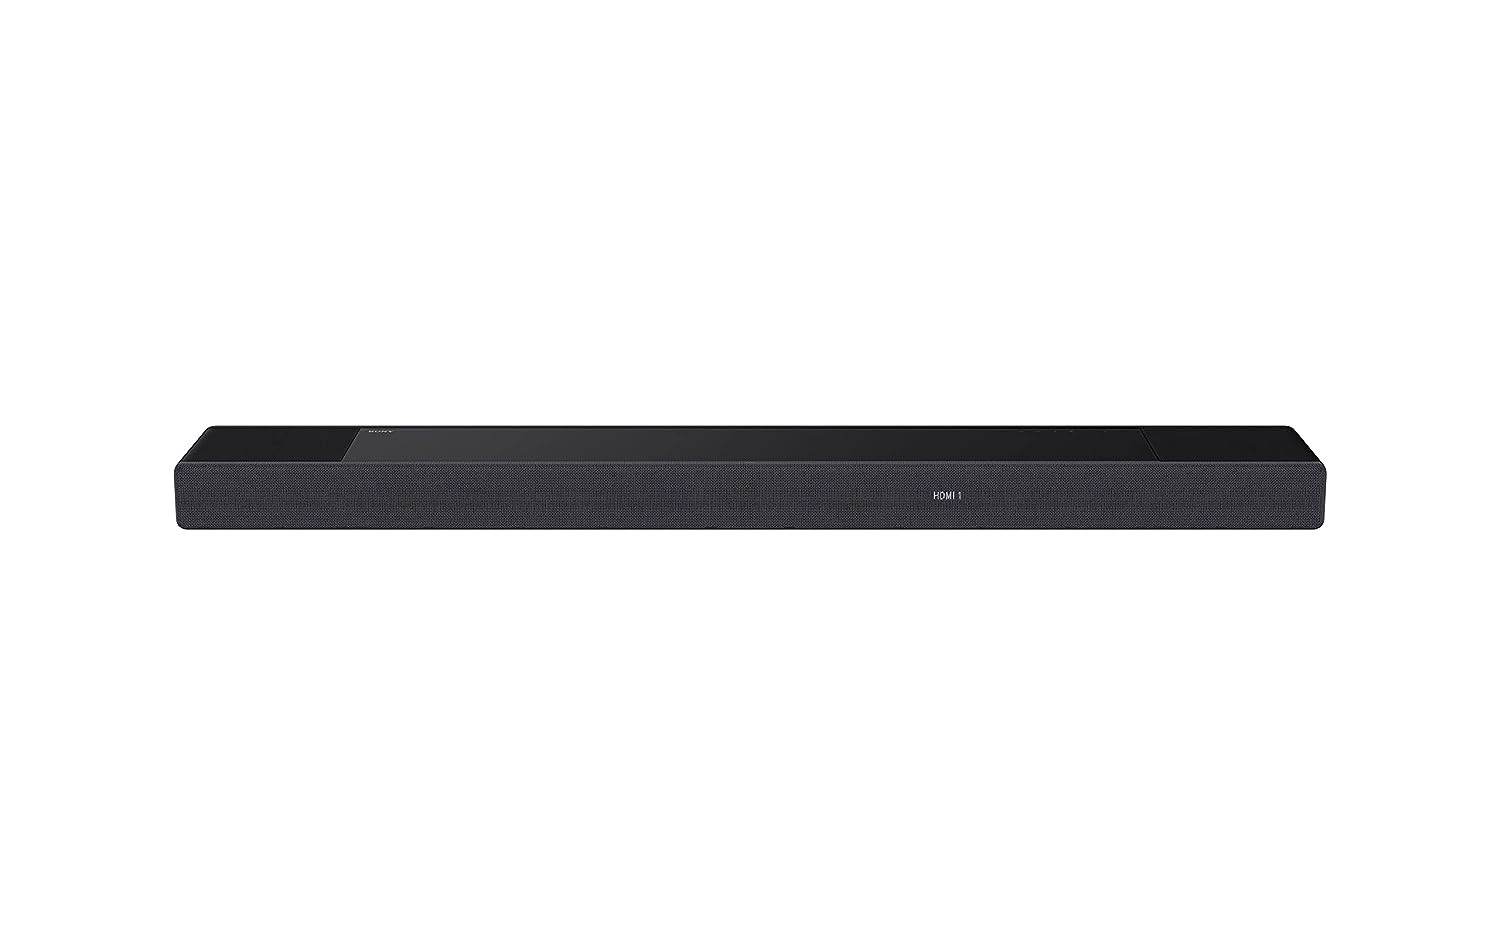 Sony HT-A7000 A Series Premium Soundbar 712Ch 8K4K 360 Spatial Sound Mapping for surround sound Home Theatre System with Dolby AtmosHi Res  360 RABTWiFiAlexaSpotifyHDMI eArc  OpticalBlack